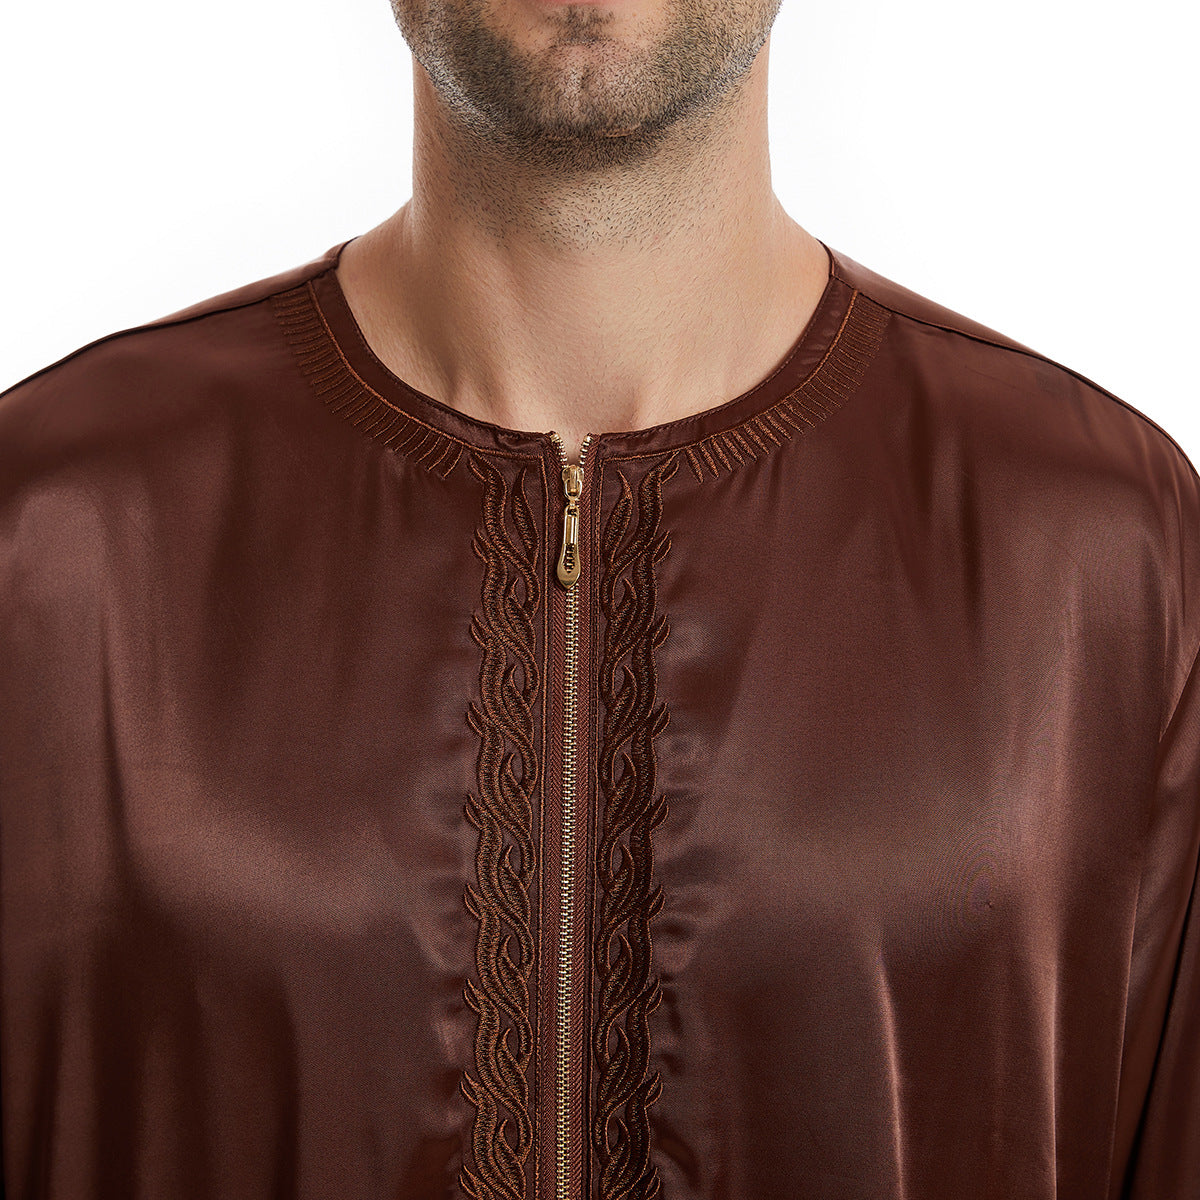 Hikmah Boutique's exquisite Men's Abaya Full Sleeves in Coffee, meticulously crafted to embody elegance and comfort synonymous with Islamic clothing for men. Each piece is a fusion of tradition and contemporary Modest Clothing fashion.